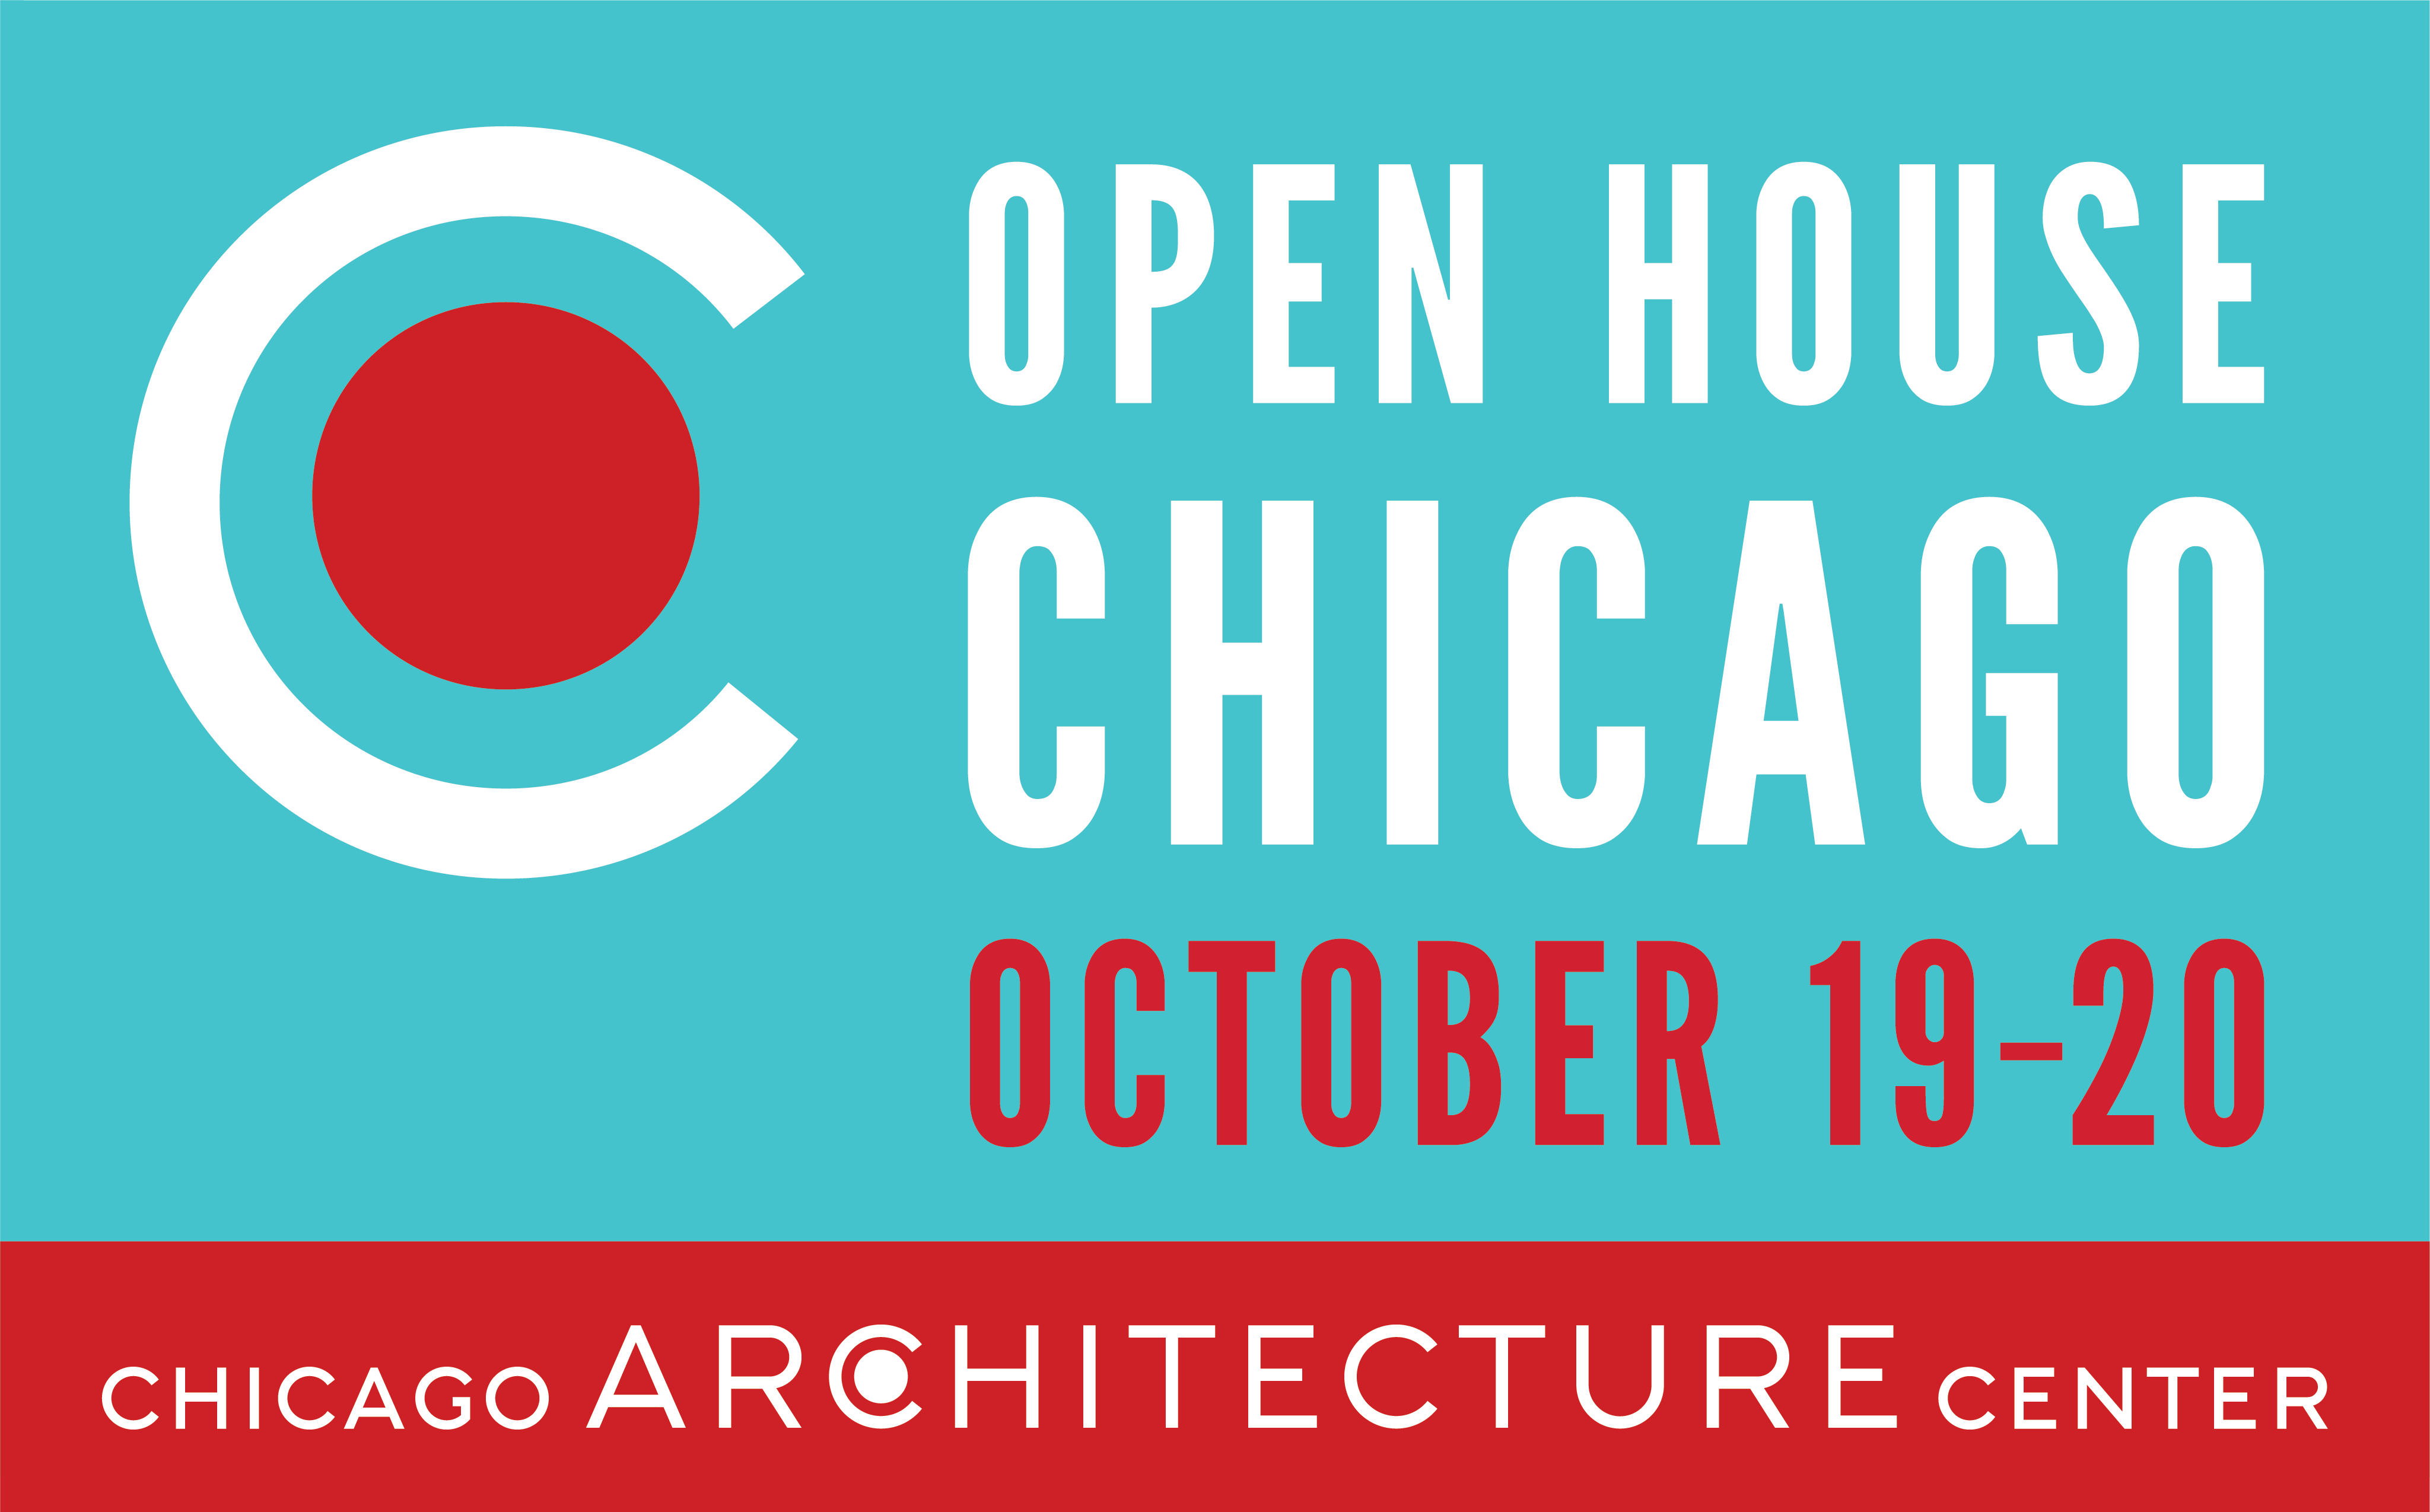 Graphic that reads "Open House Chicago: October 19-20, Chicago Architecture Center"